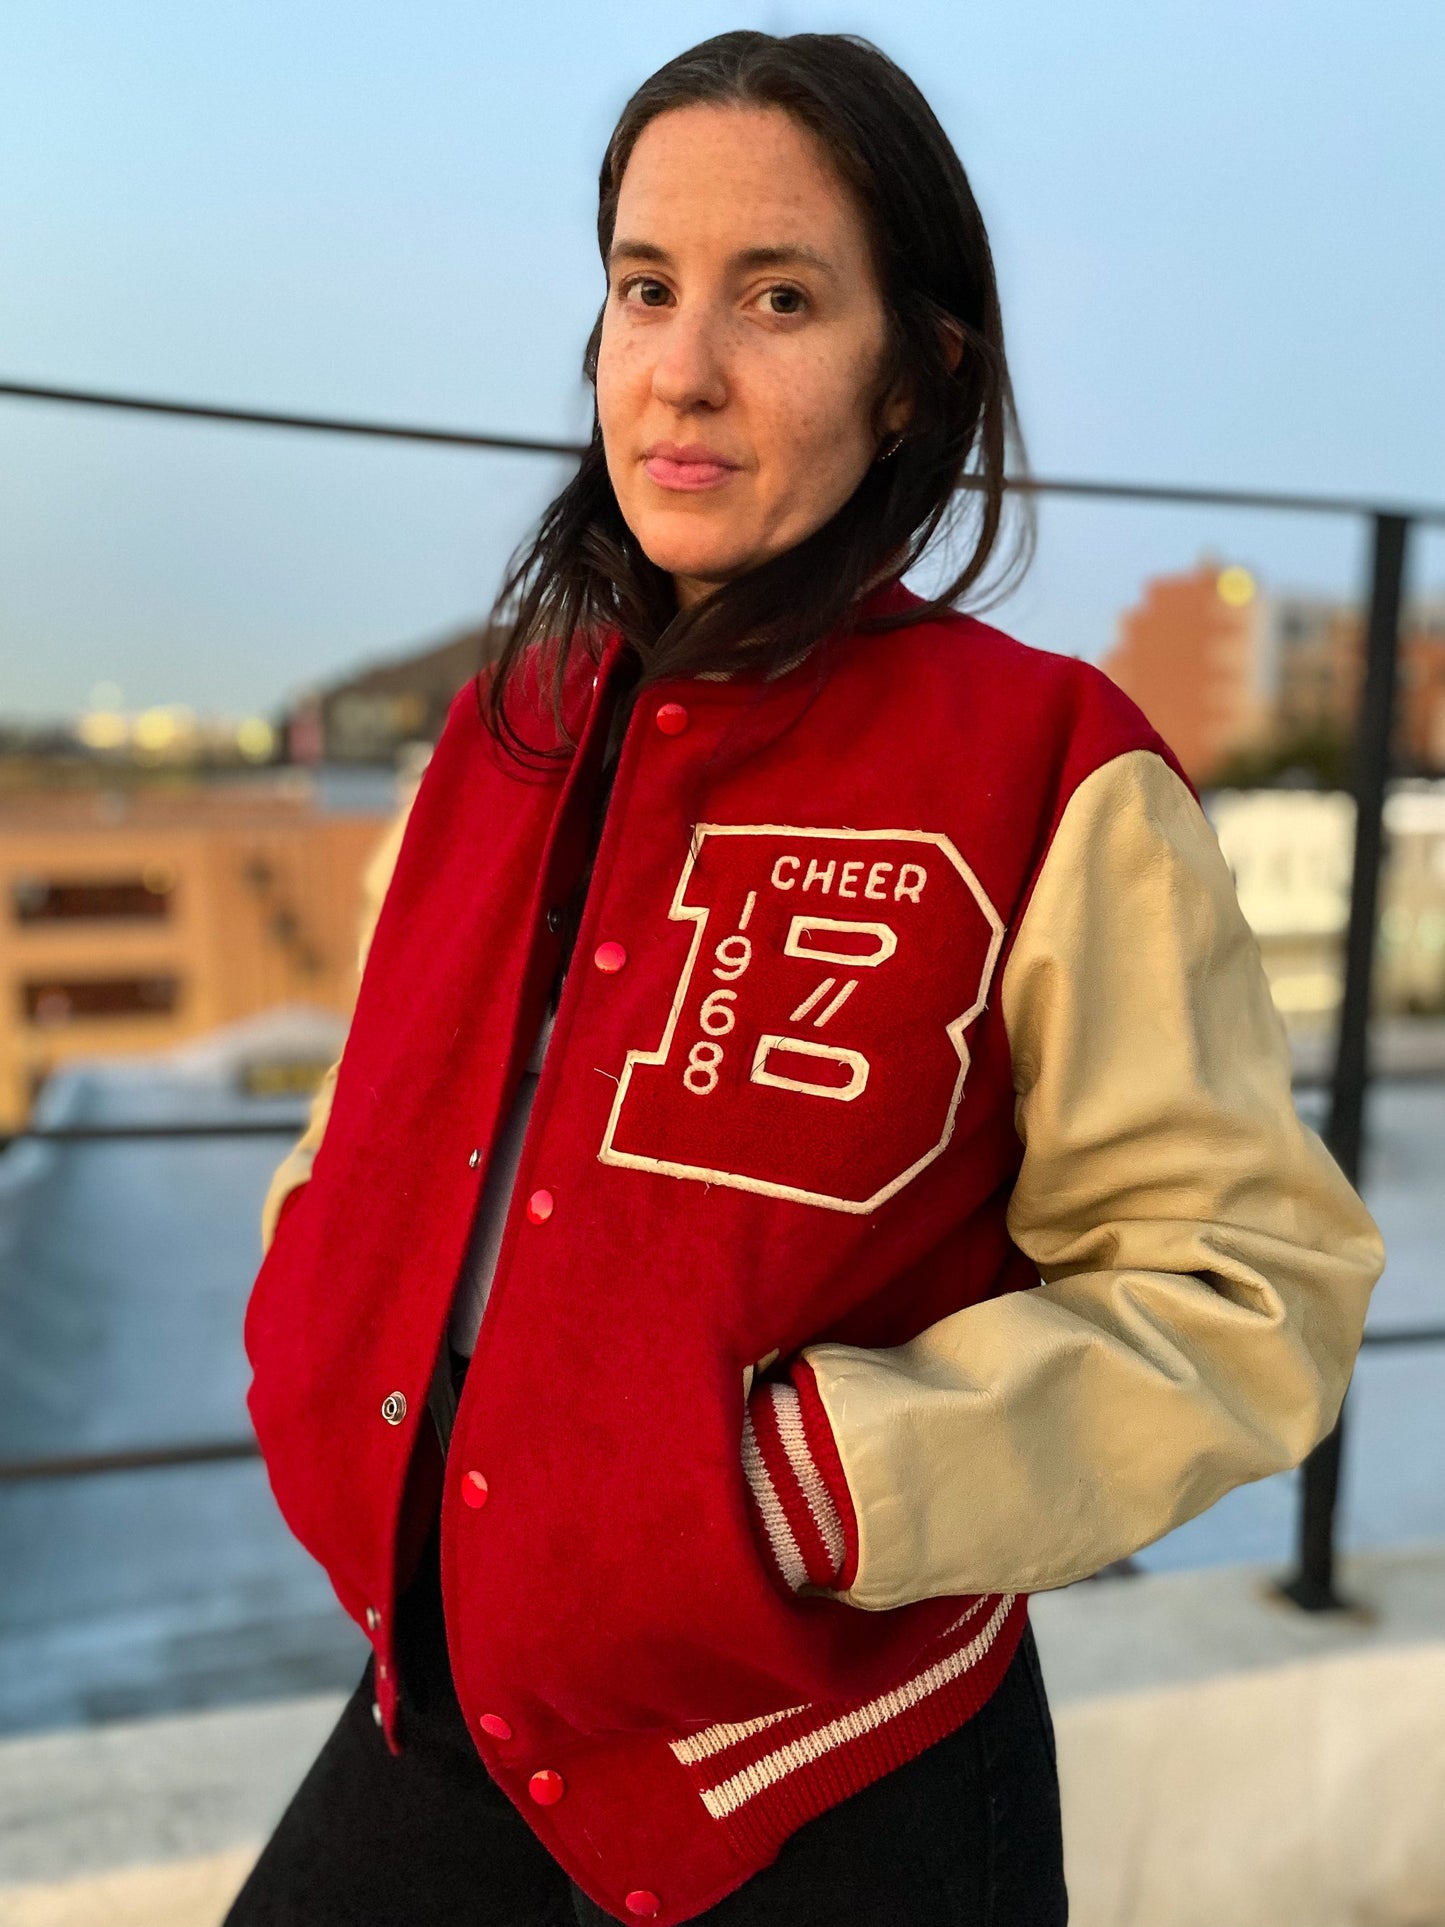 60s Red & Cream Cheer Letterman Jacket